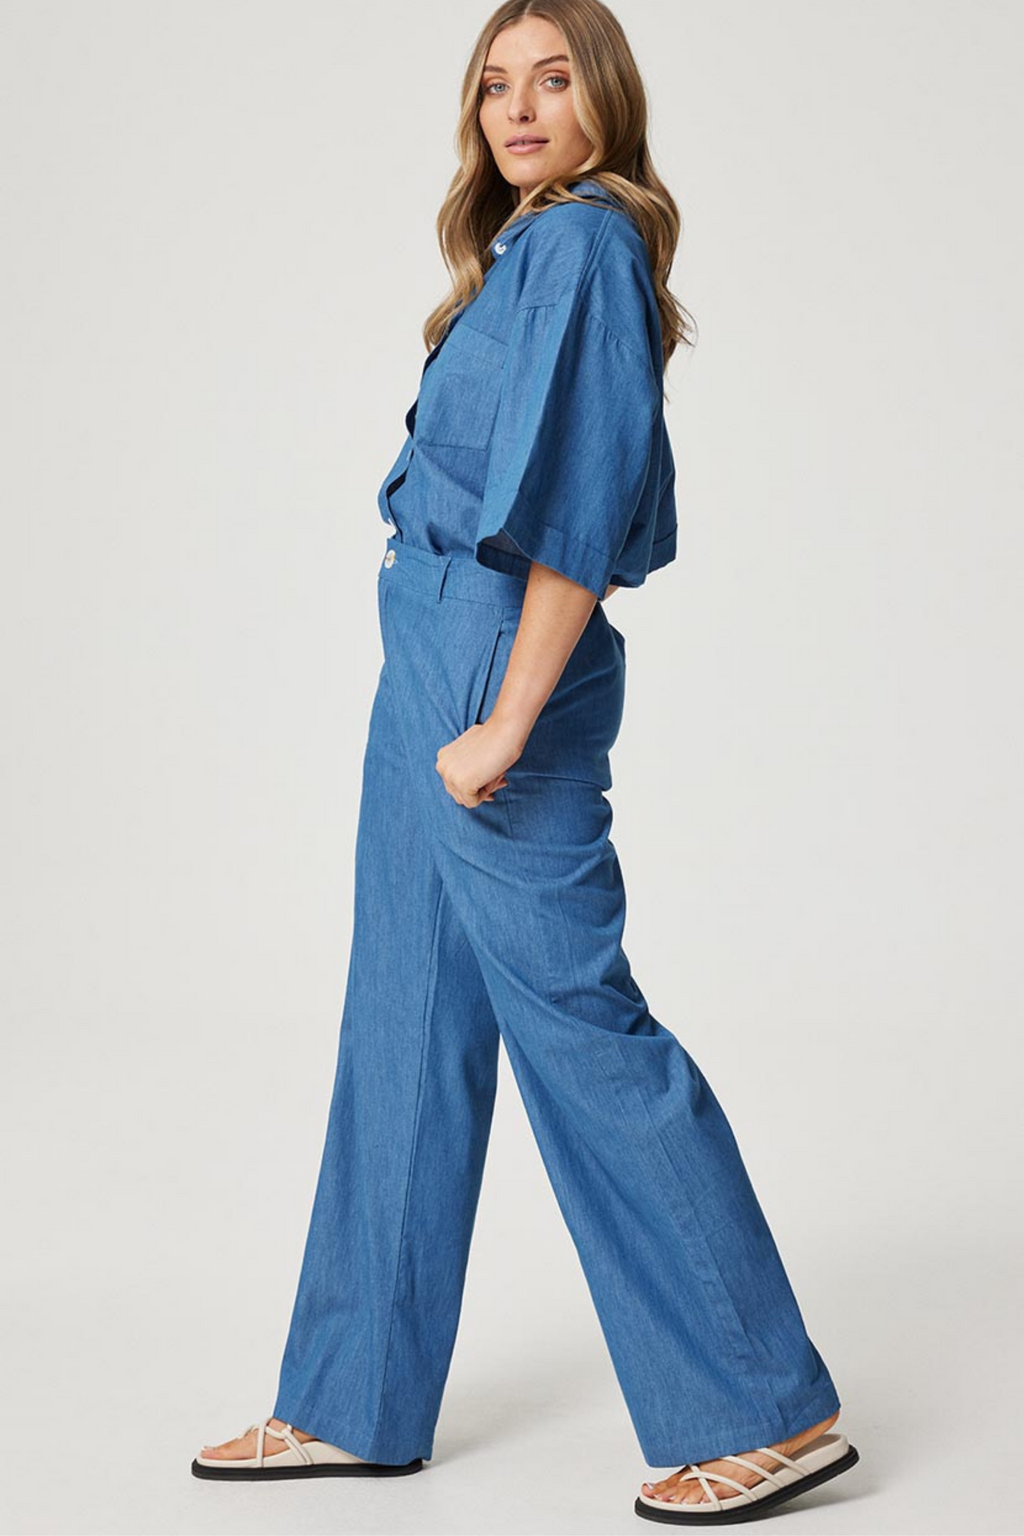 LUCY TROUSER - Denim Chambray